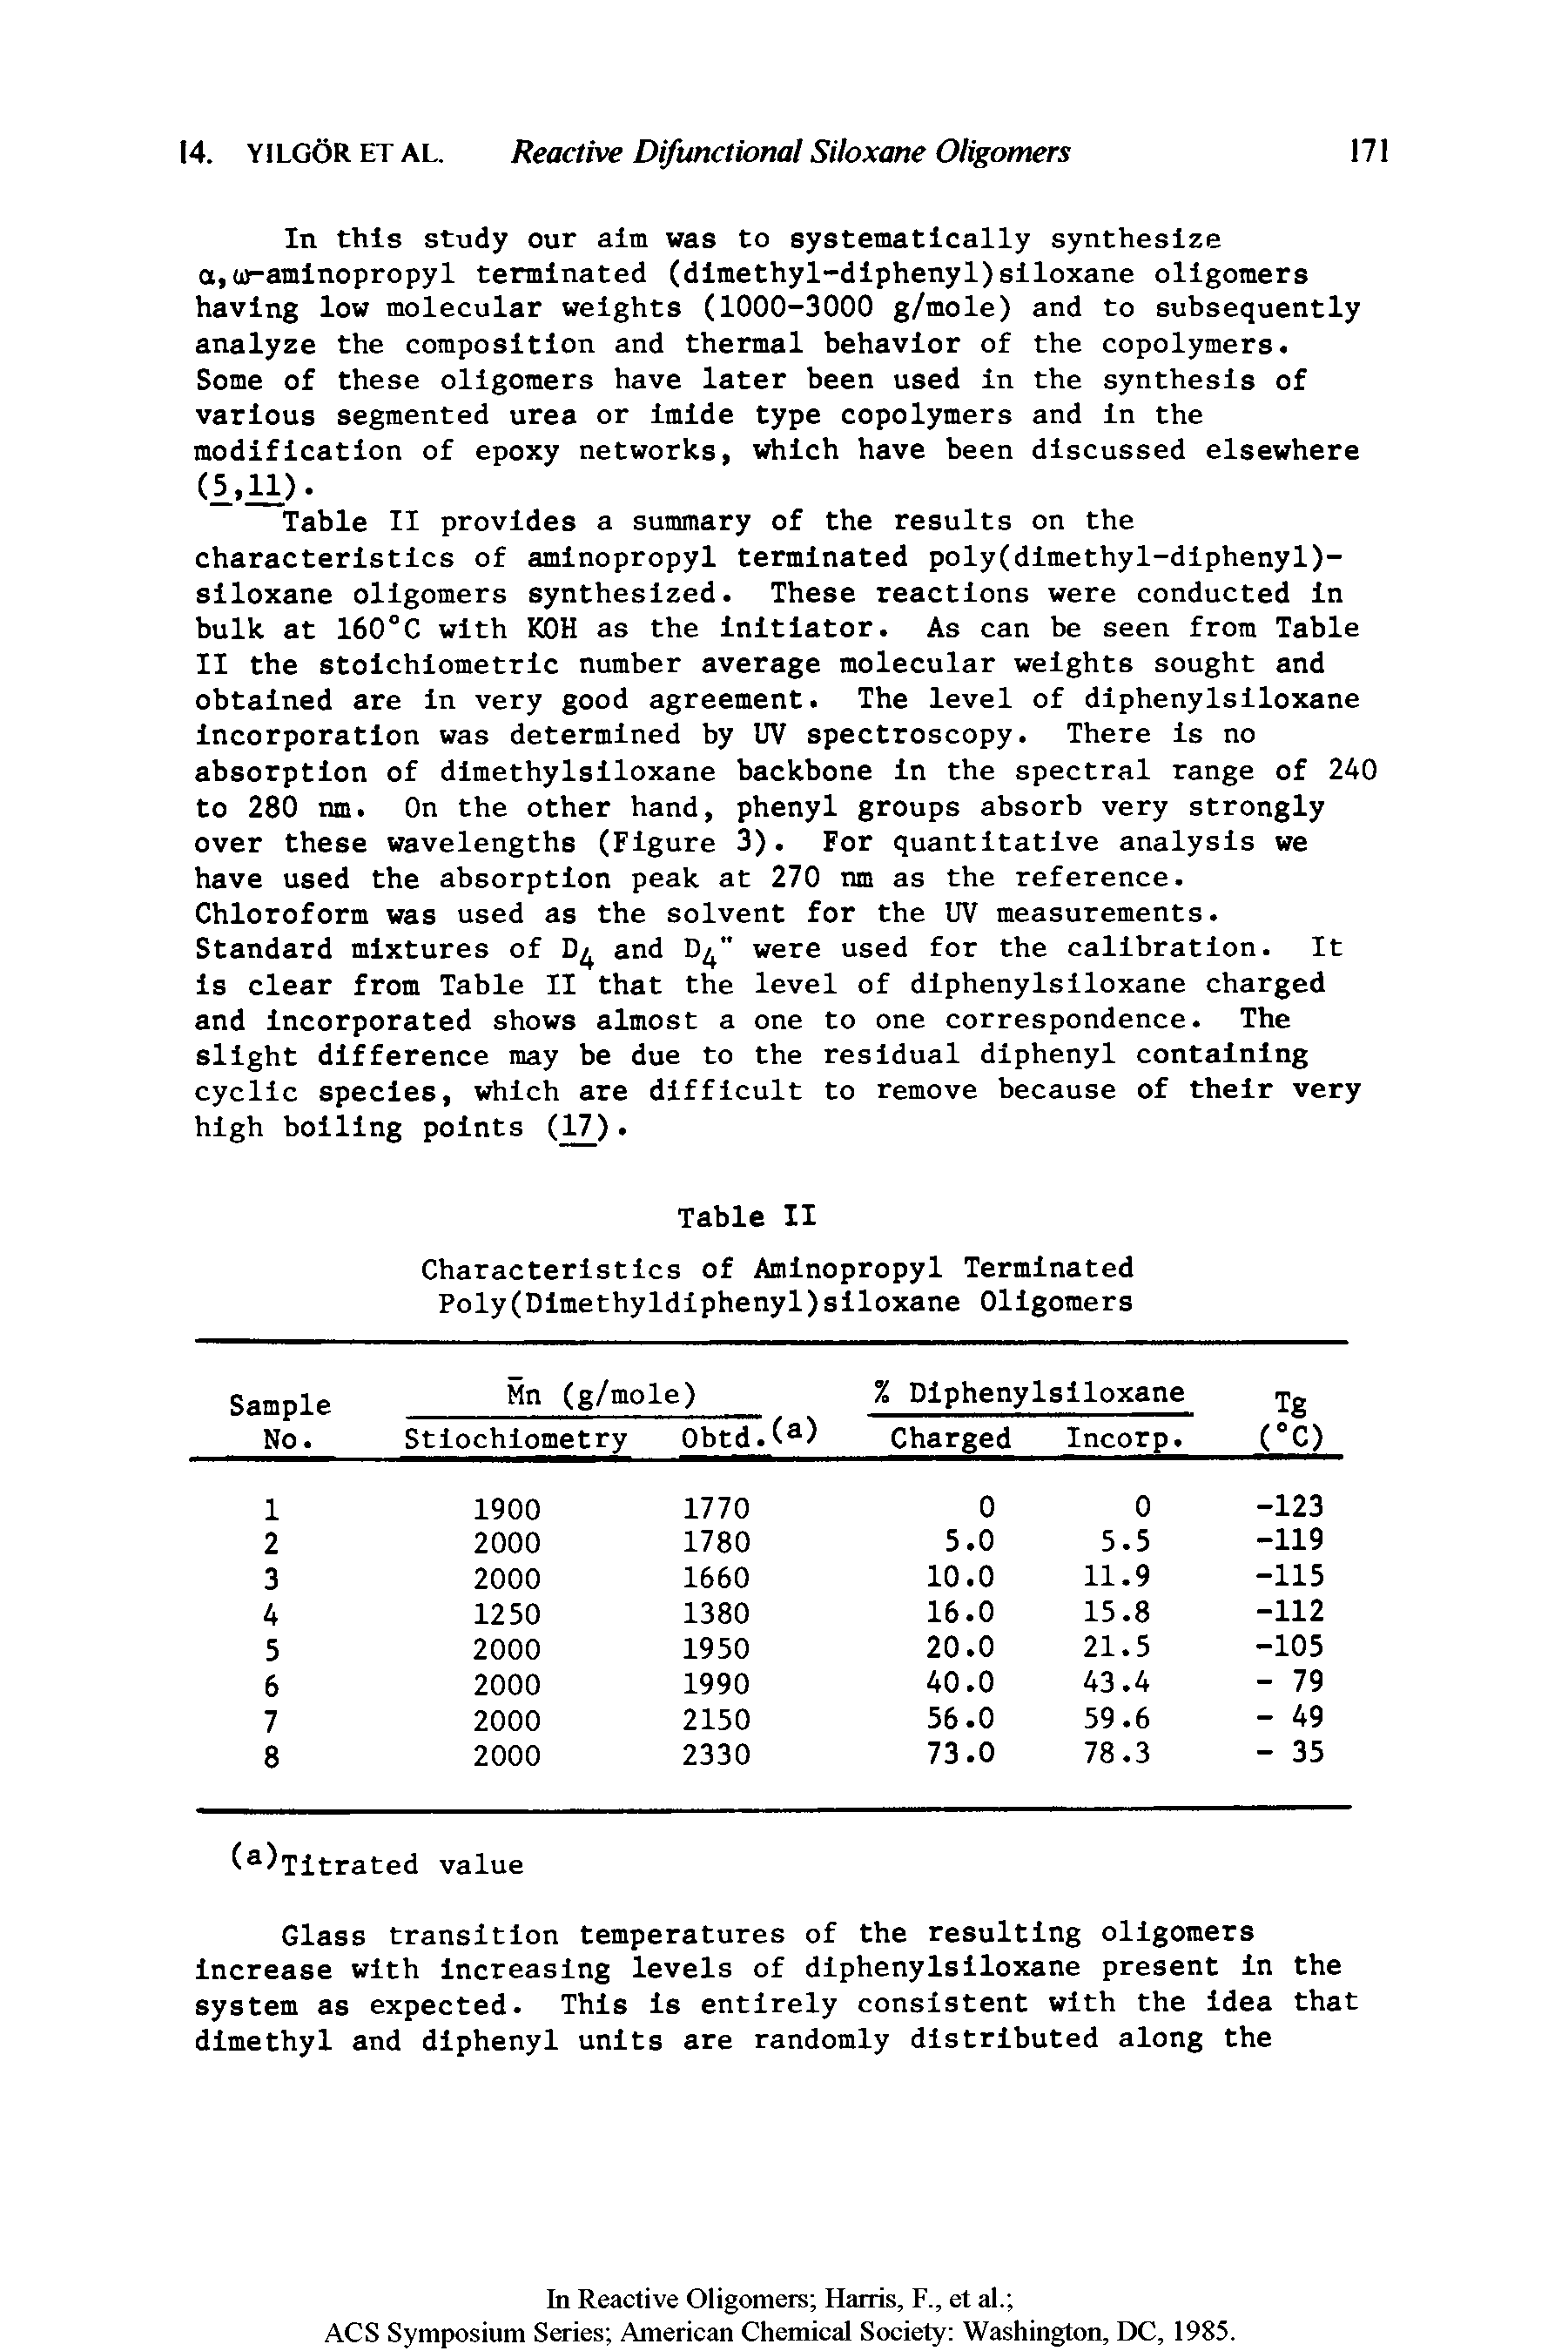 Table II provides a summary of the results on the characteristics of aminopropyl terminated poly(dimethyl-diphenyl)-siloxane oligomers synthesized. These reactions were conducted in bulk at 160°C with K0H as the initiator. As can be seen from Table II the stoichiometric number average molecular weights sought and obtained are in very good agreement. The level of diphenylsiloxane incorporation was determined by UV spectroscopy. There is no absorption of dimethylsiloxane backbone in the spectral range of 240 to 280 nm. On the other hand, phenyl groups absorb very strongly over these wavelengths (Figure 3). For quantitative analysis we have used the absorption peak at 270 nm as the reference.